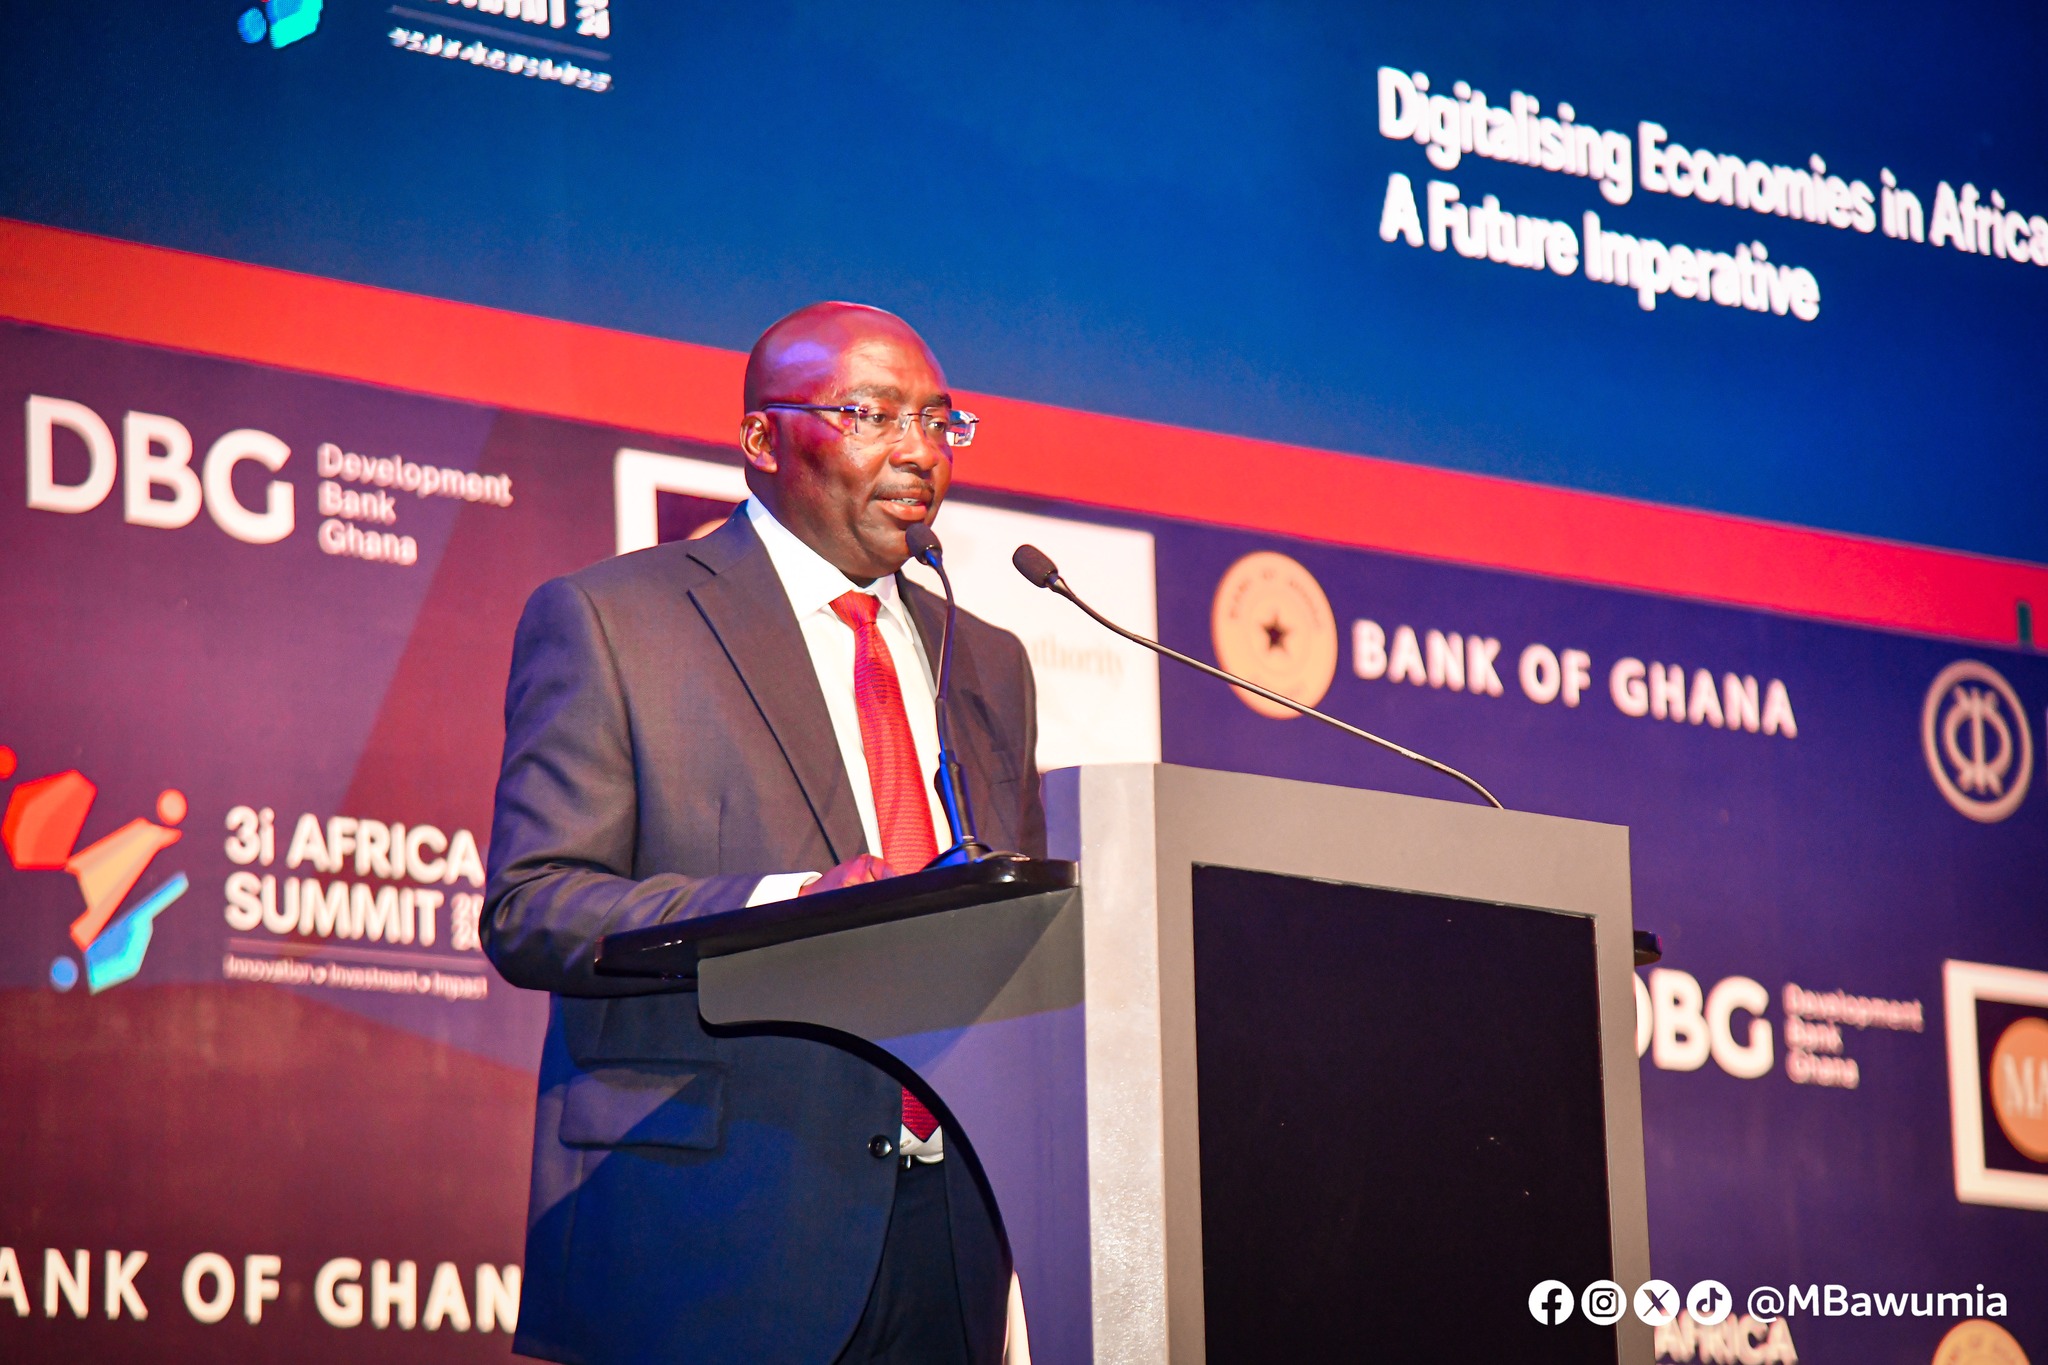 Digital identity and mobile money interoperability are key to financial inclusion in Africa- Vice President Bawumia